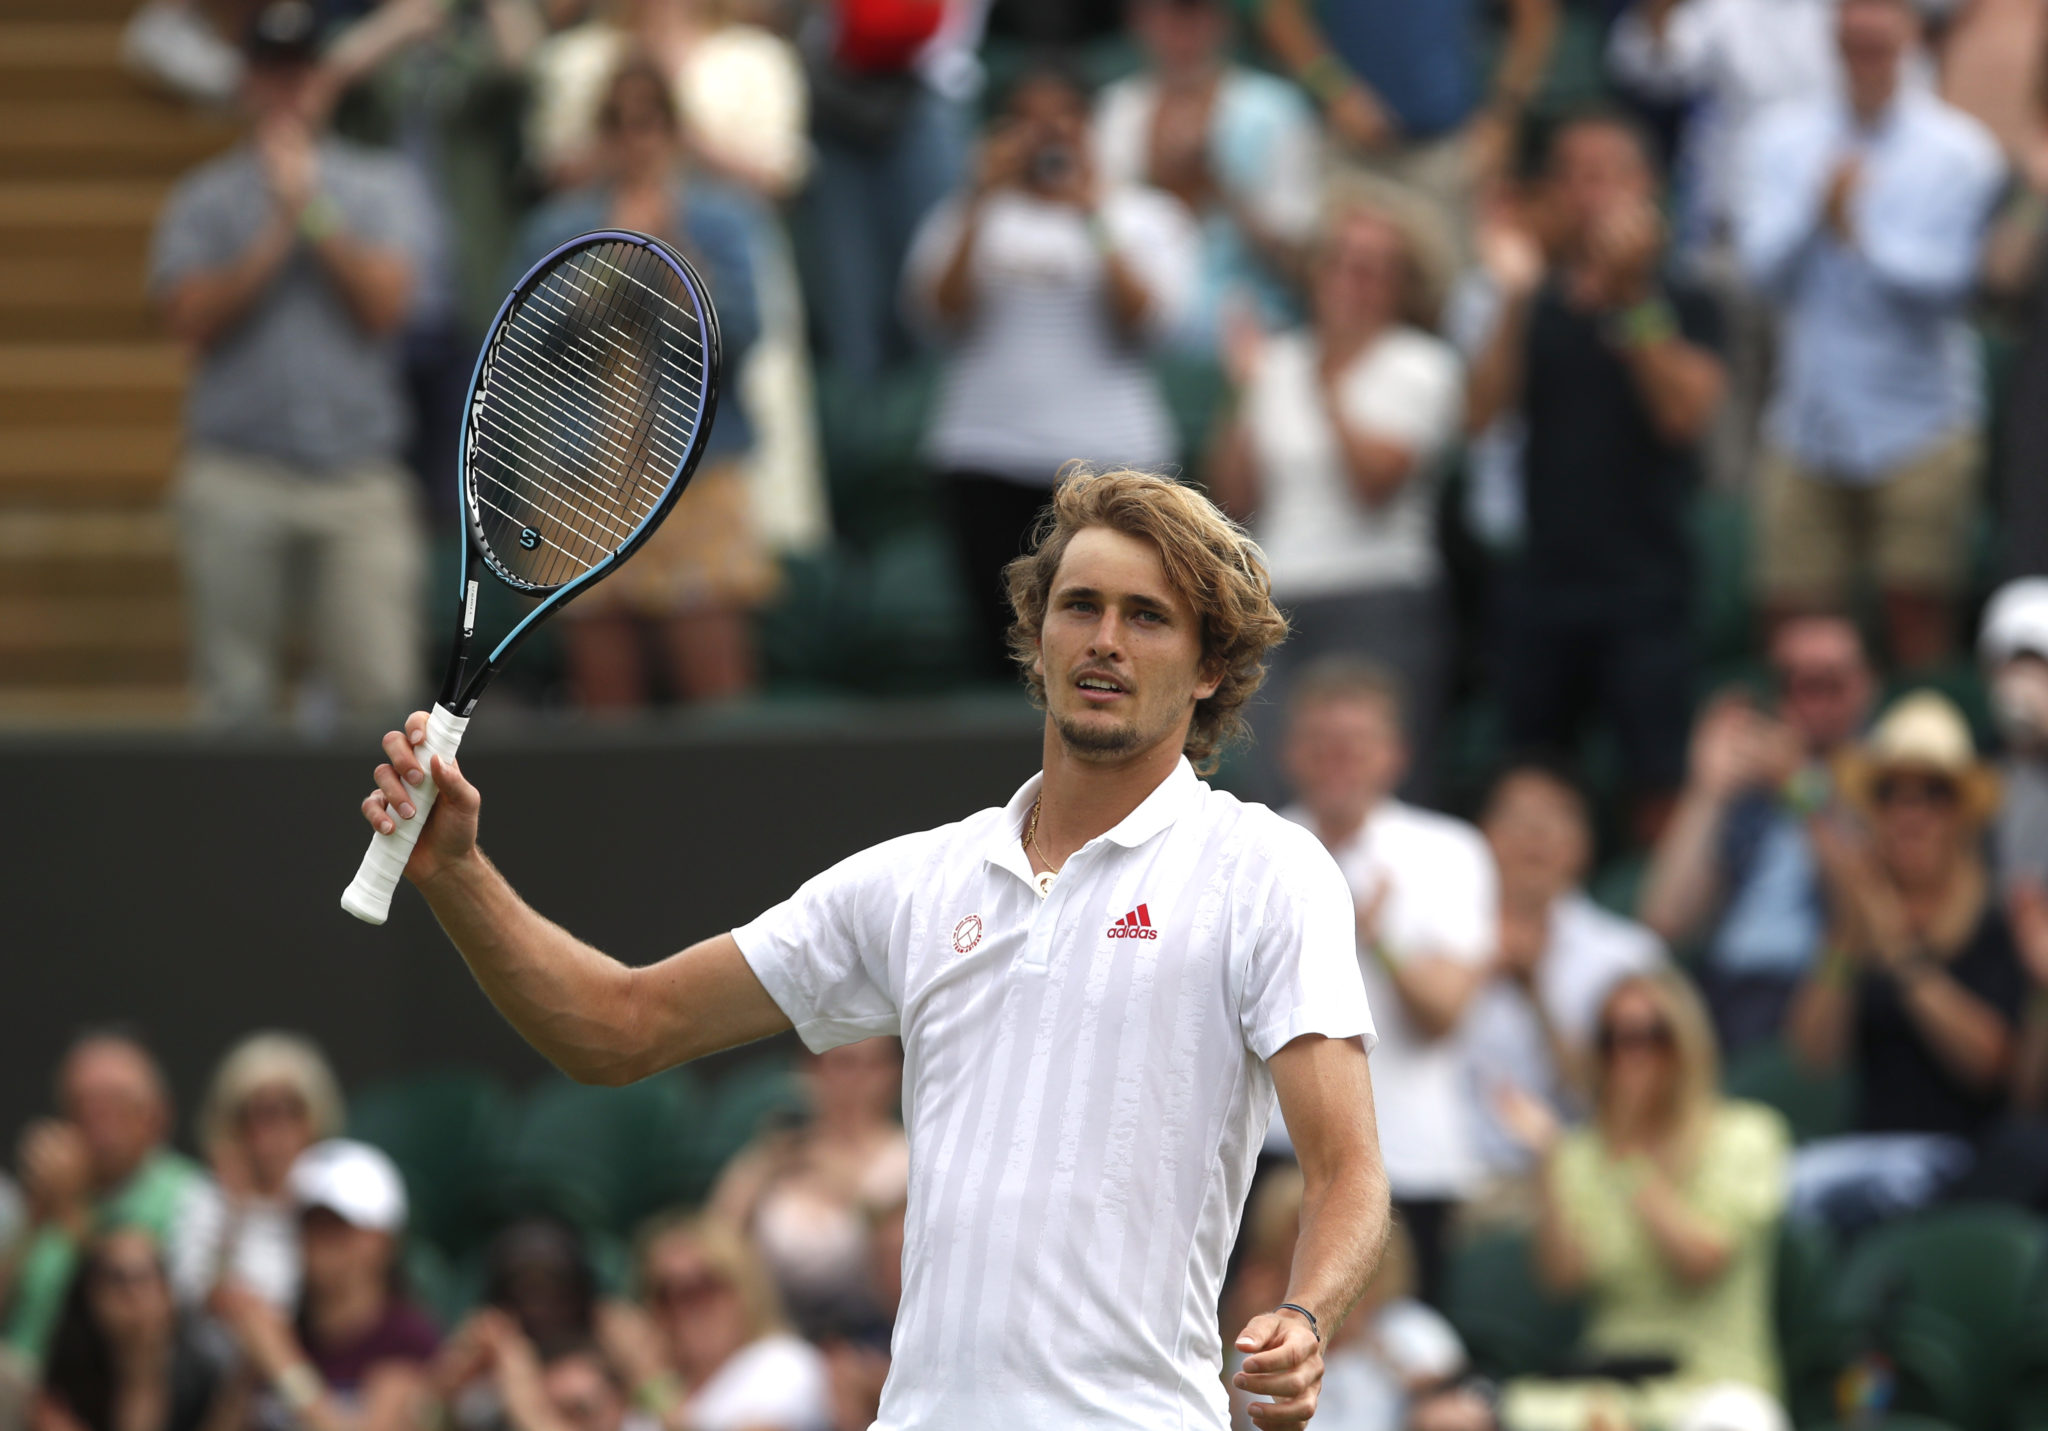 Zverev reaches second week at Wimbledon with eye on big prize